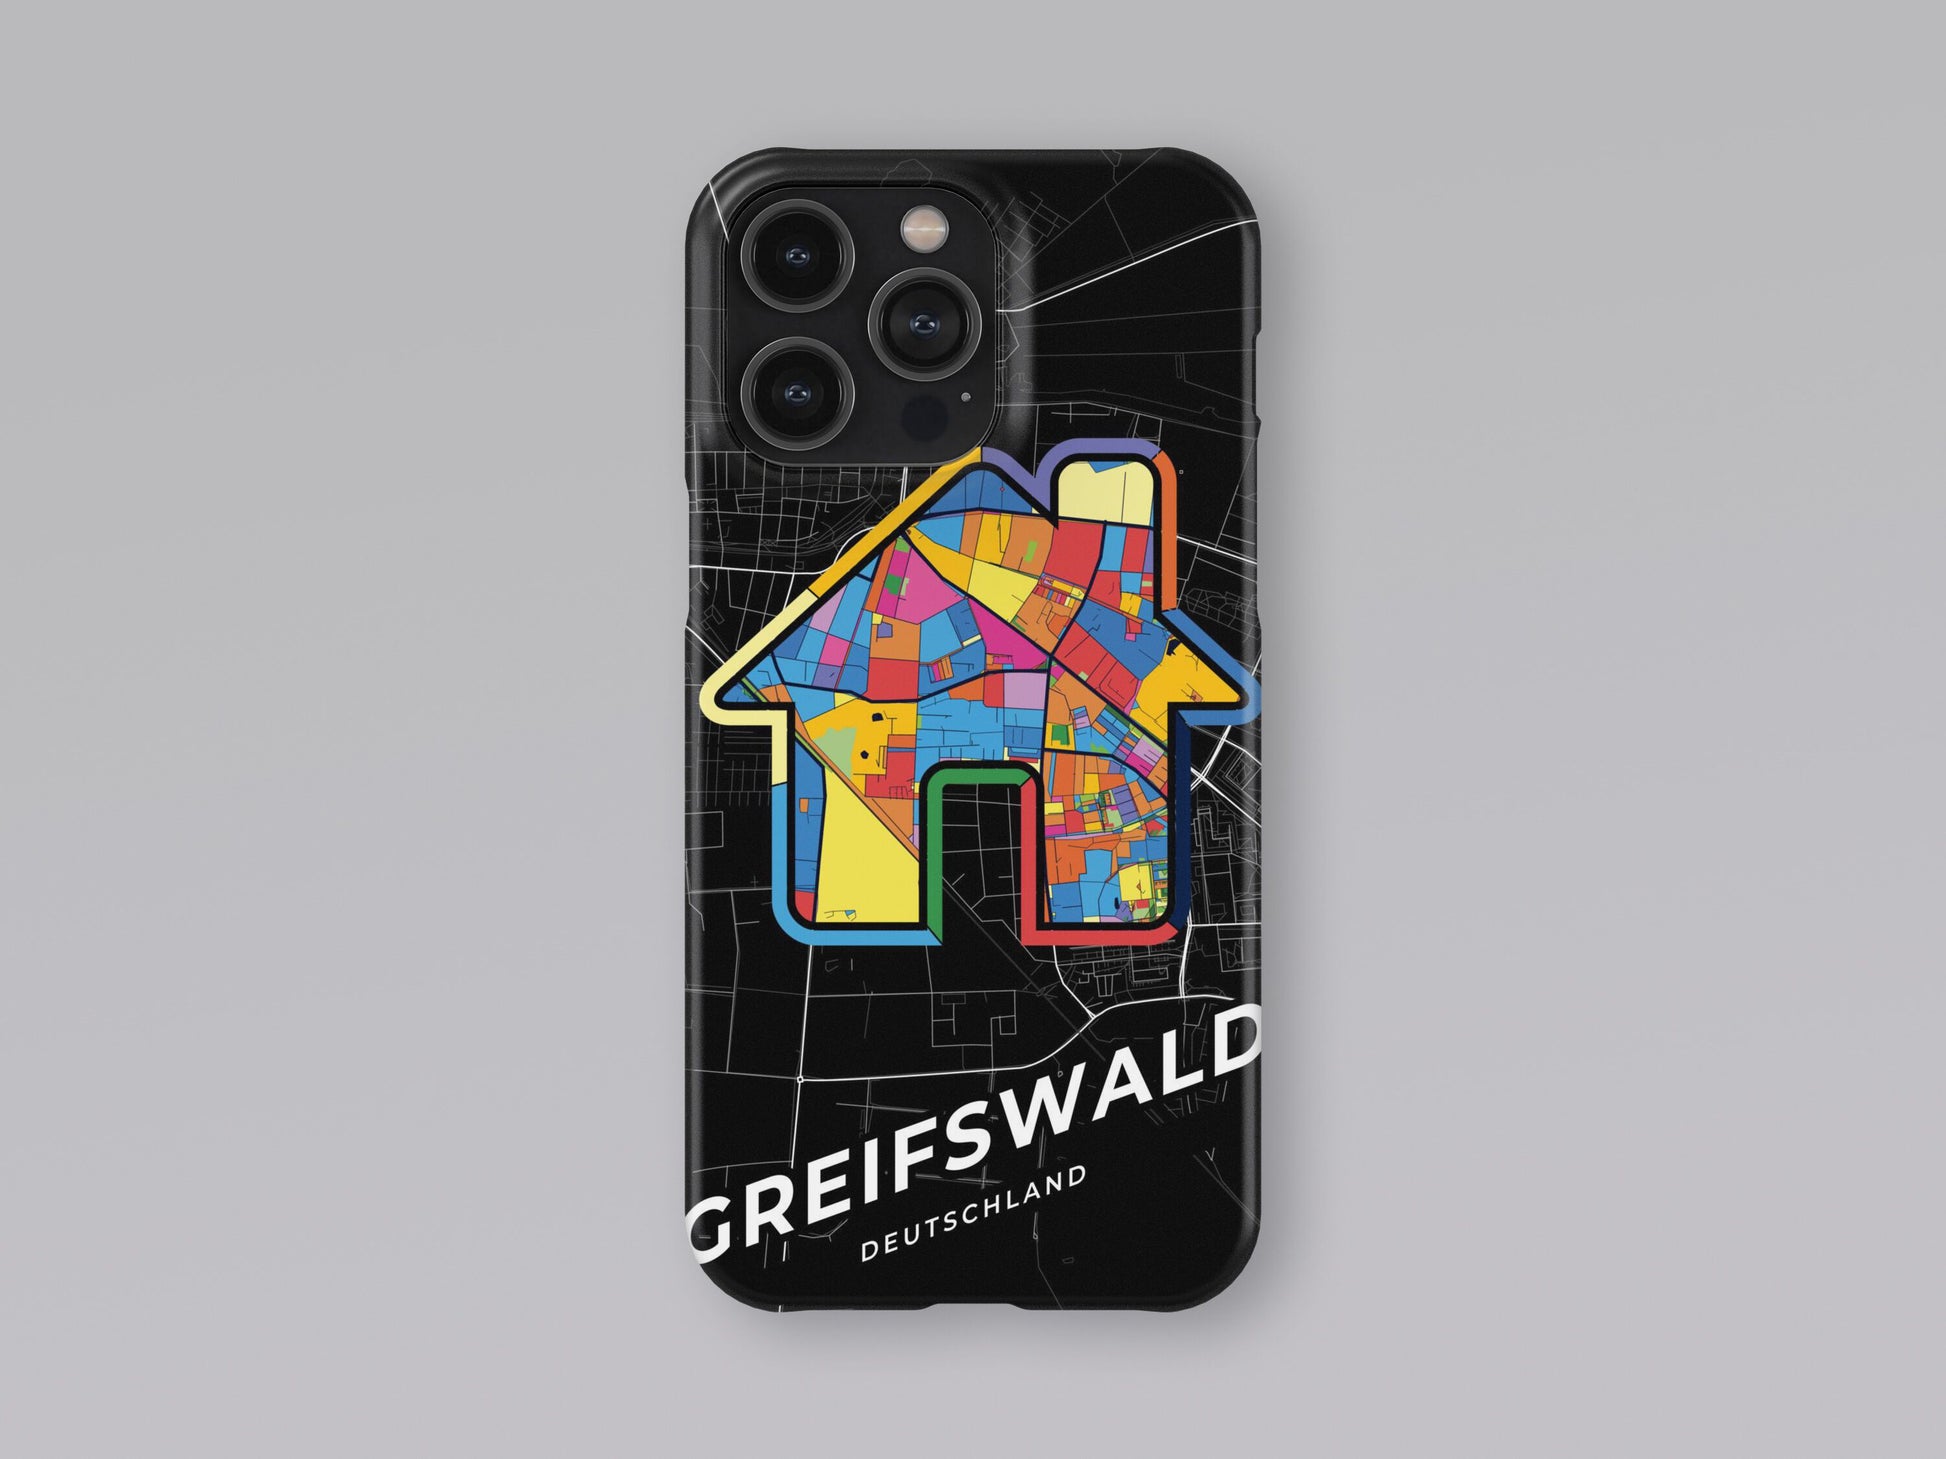 Greifswald Deutschland slim phone case with colorful icon. Birthday, wedding or housewarming gift. Couple match cases. 3